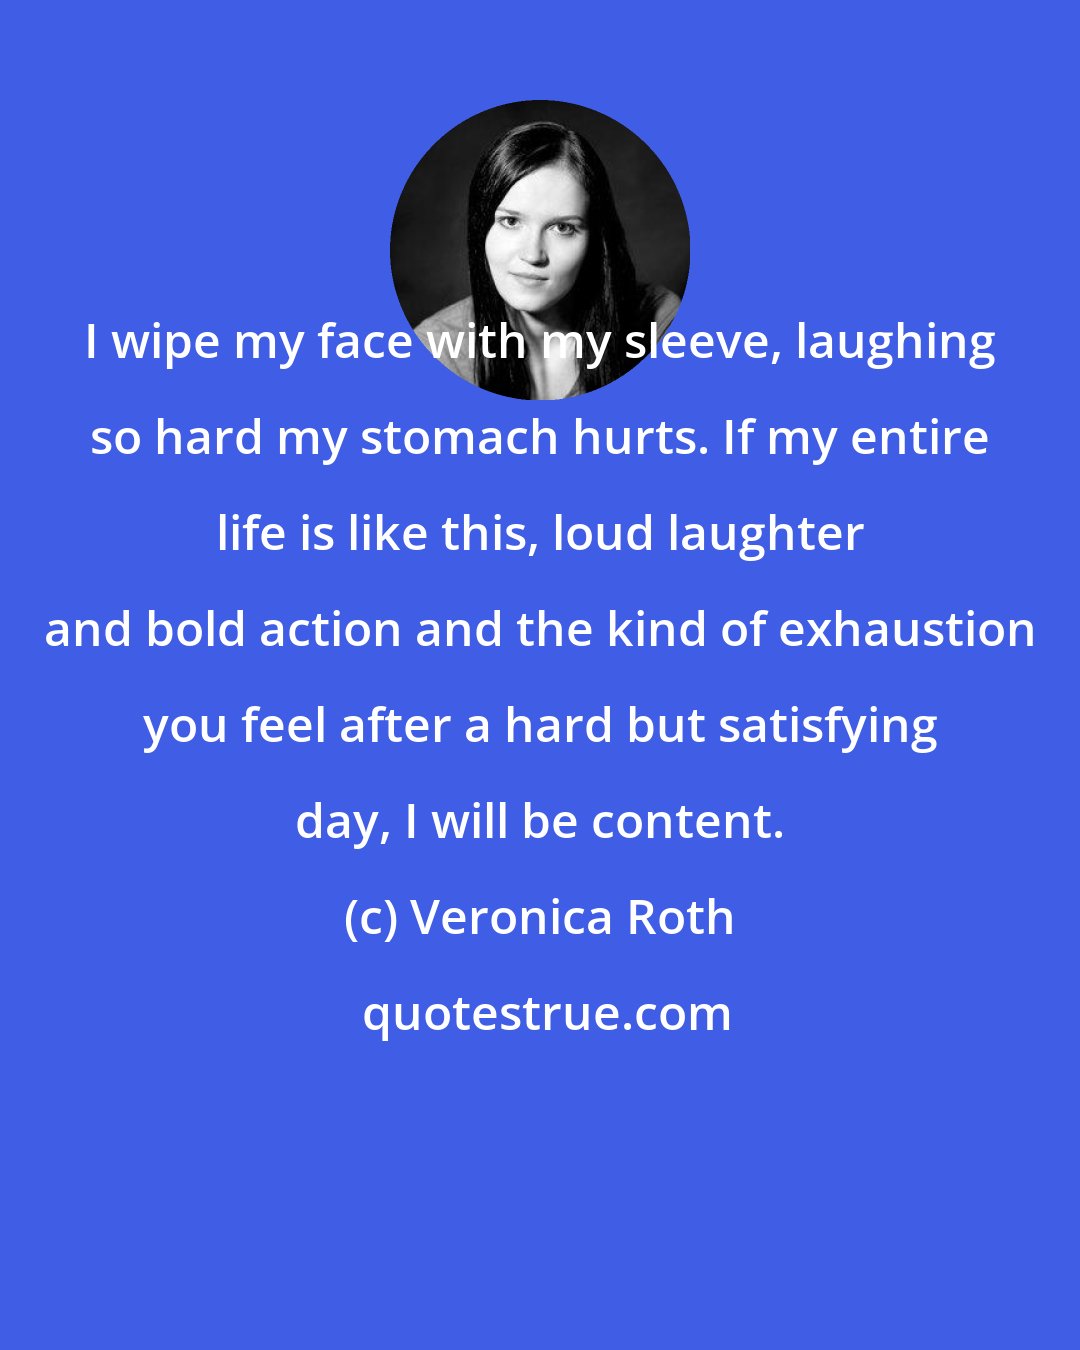 Veronica Roth: I wipe my face with my sleeve, laughing so hard my stomach hurts. If my entire life is like this, loud laughter and bold action and the kind of exhaustion you feel after a hard but satisfying day, I will be content.